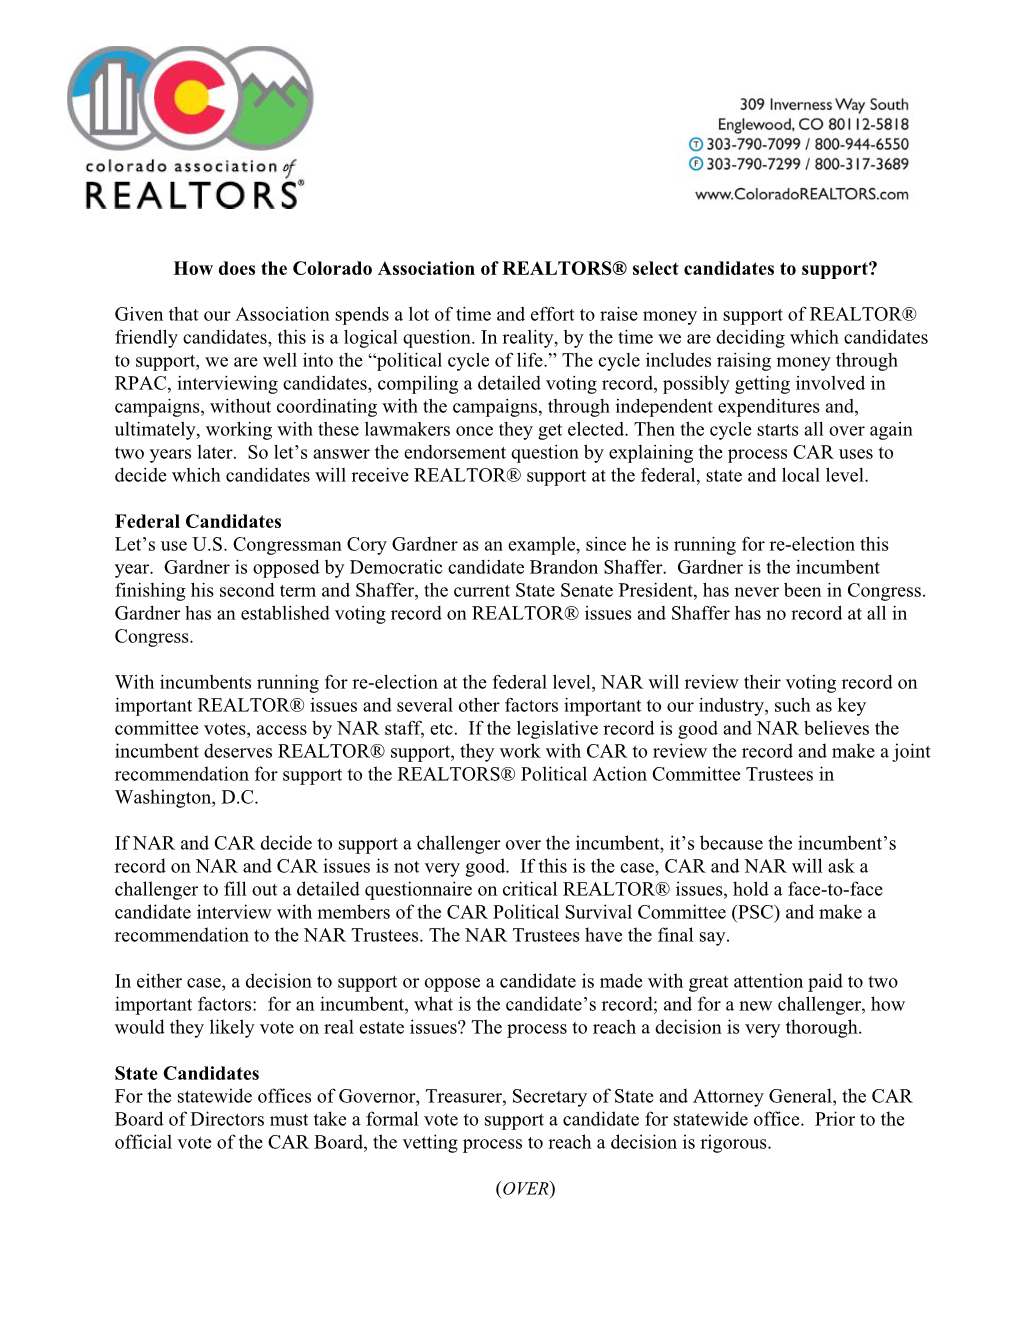 How Does the Colorado Association of REALTORS® Select Candidates to Support?